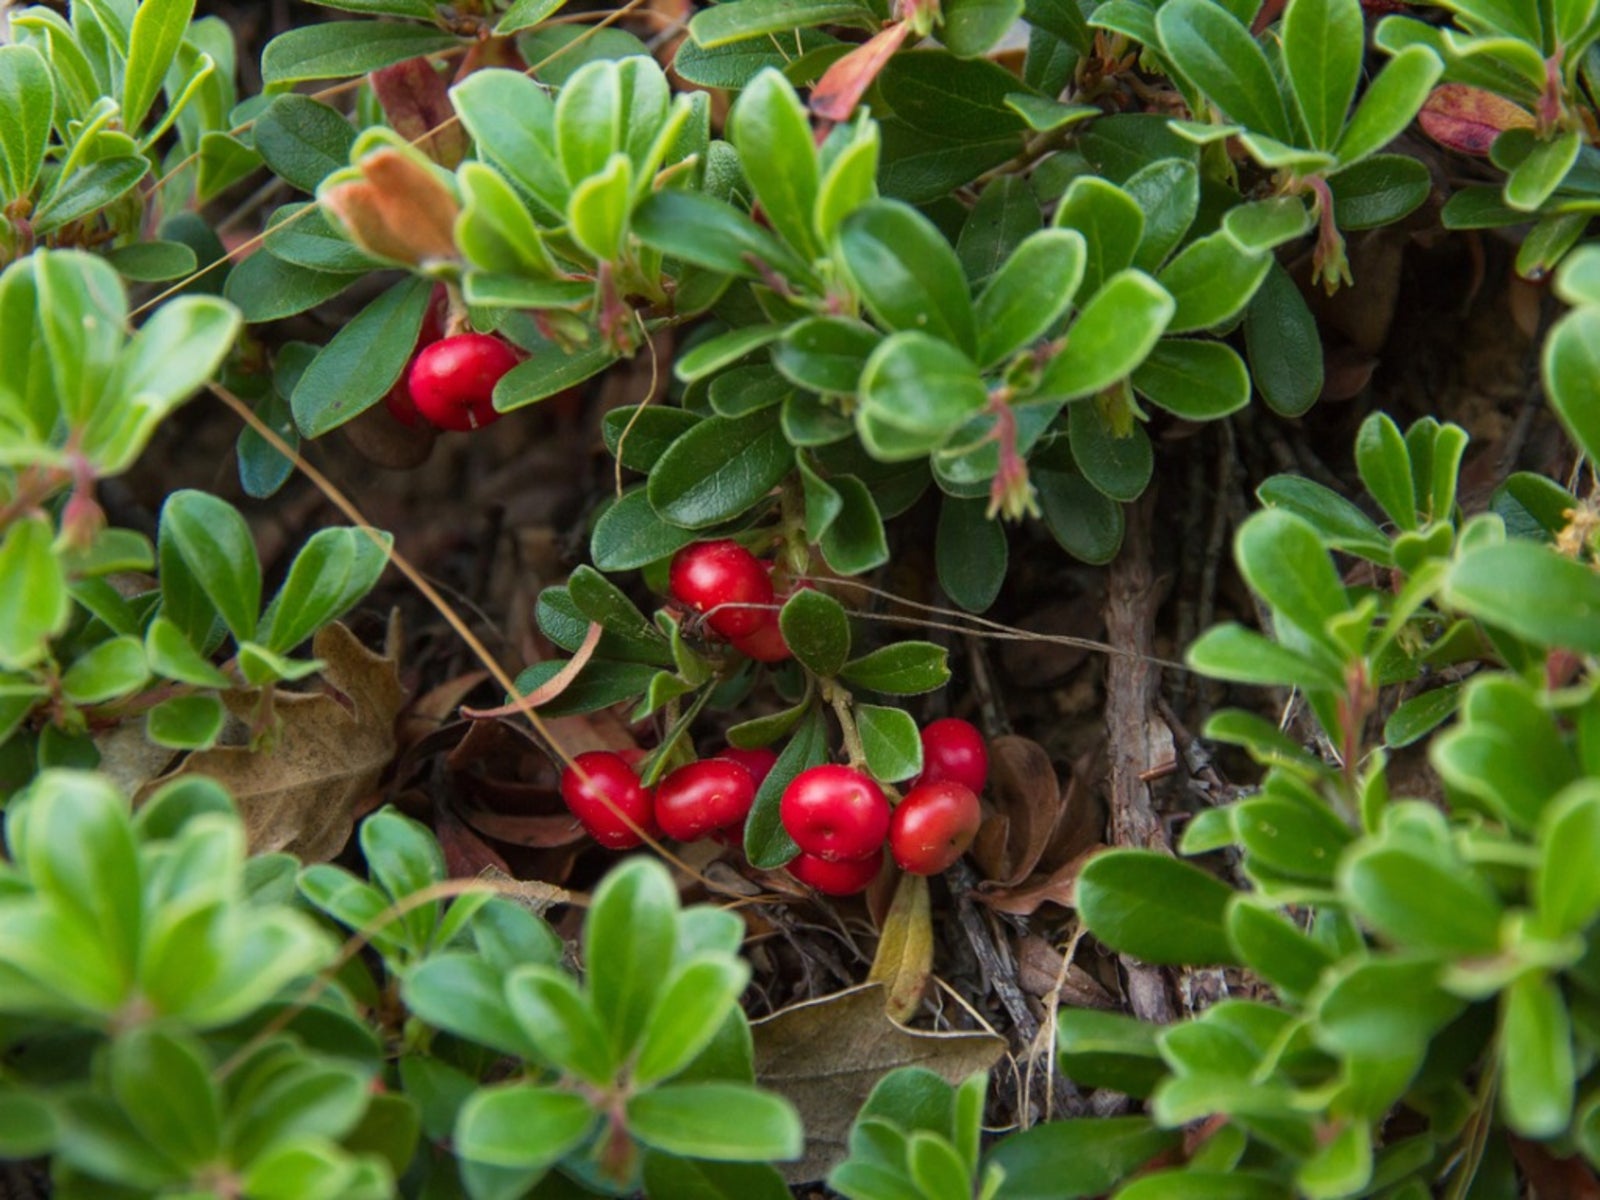 bearberry care - growing bearberries in the home landscape